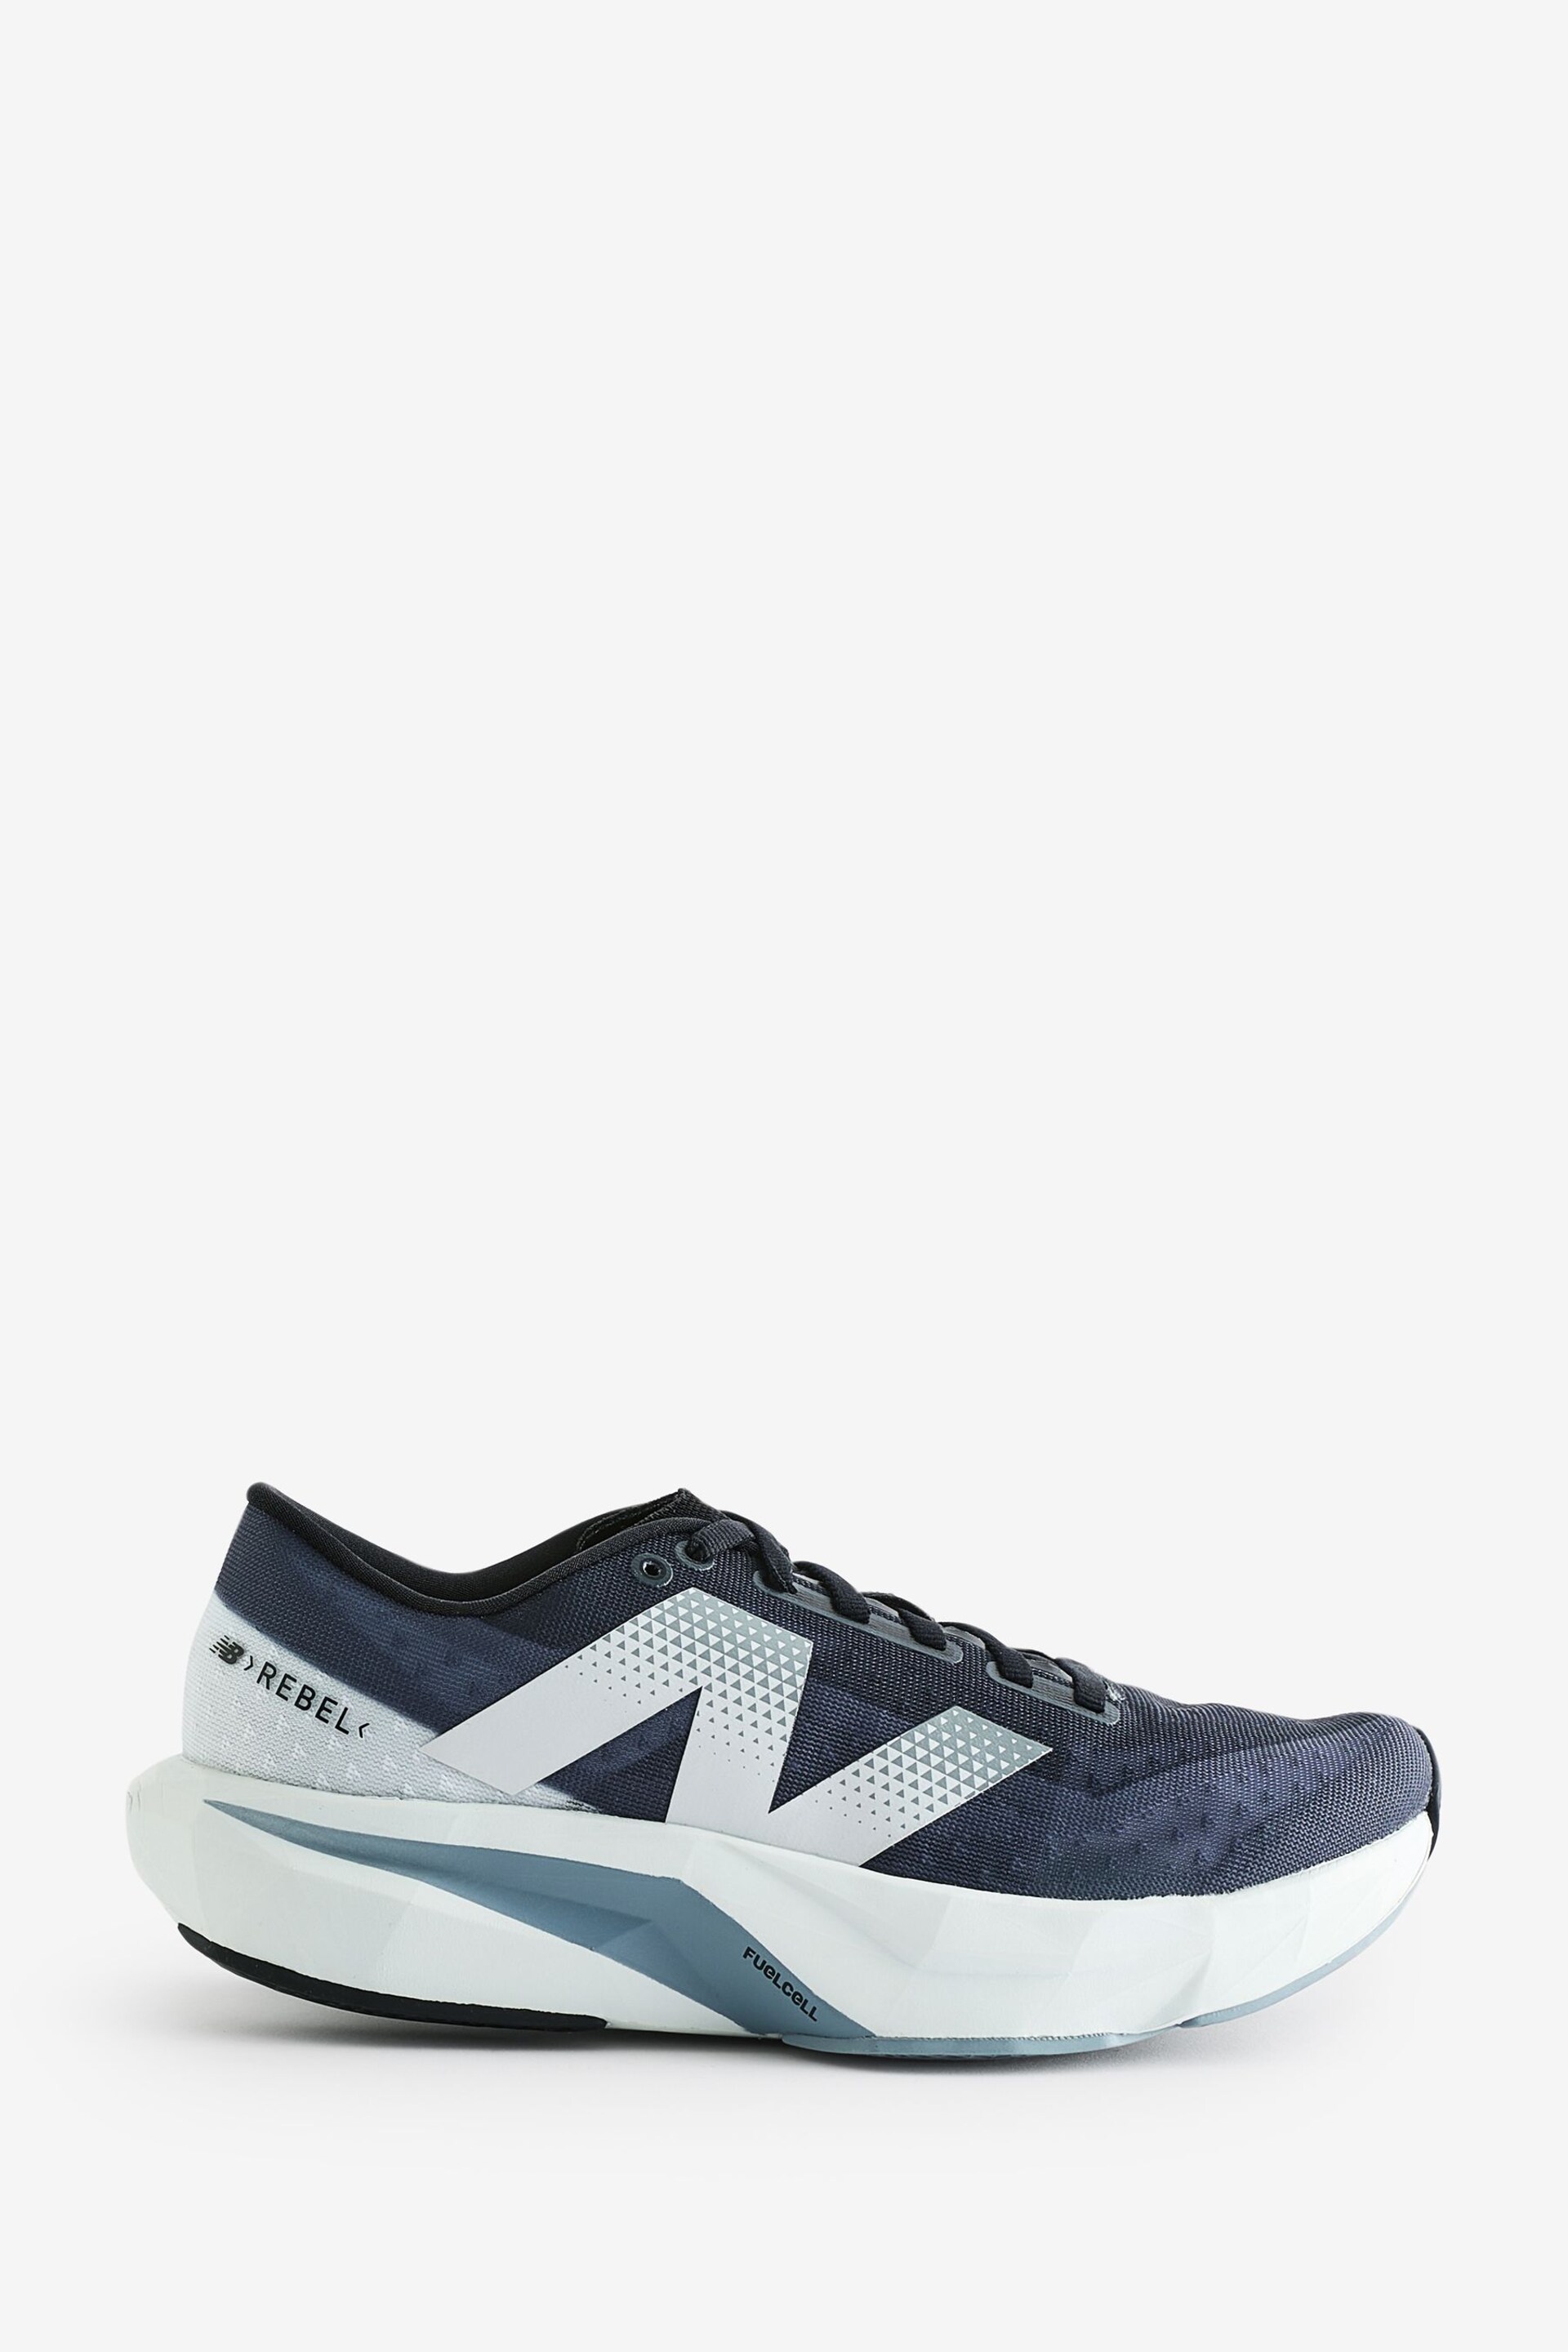 New Balance Grey Womens Fuelcell Rebel Trainers - Image 1 of 10